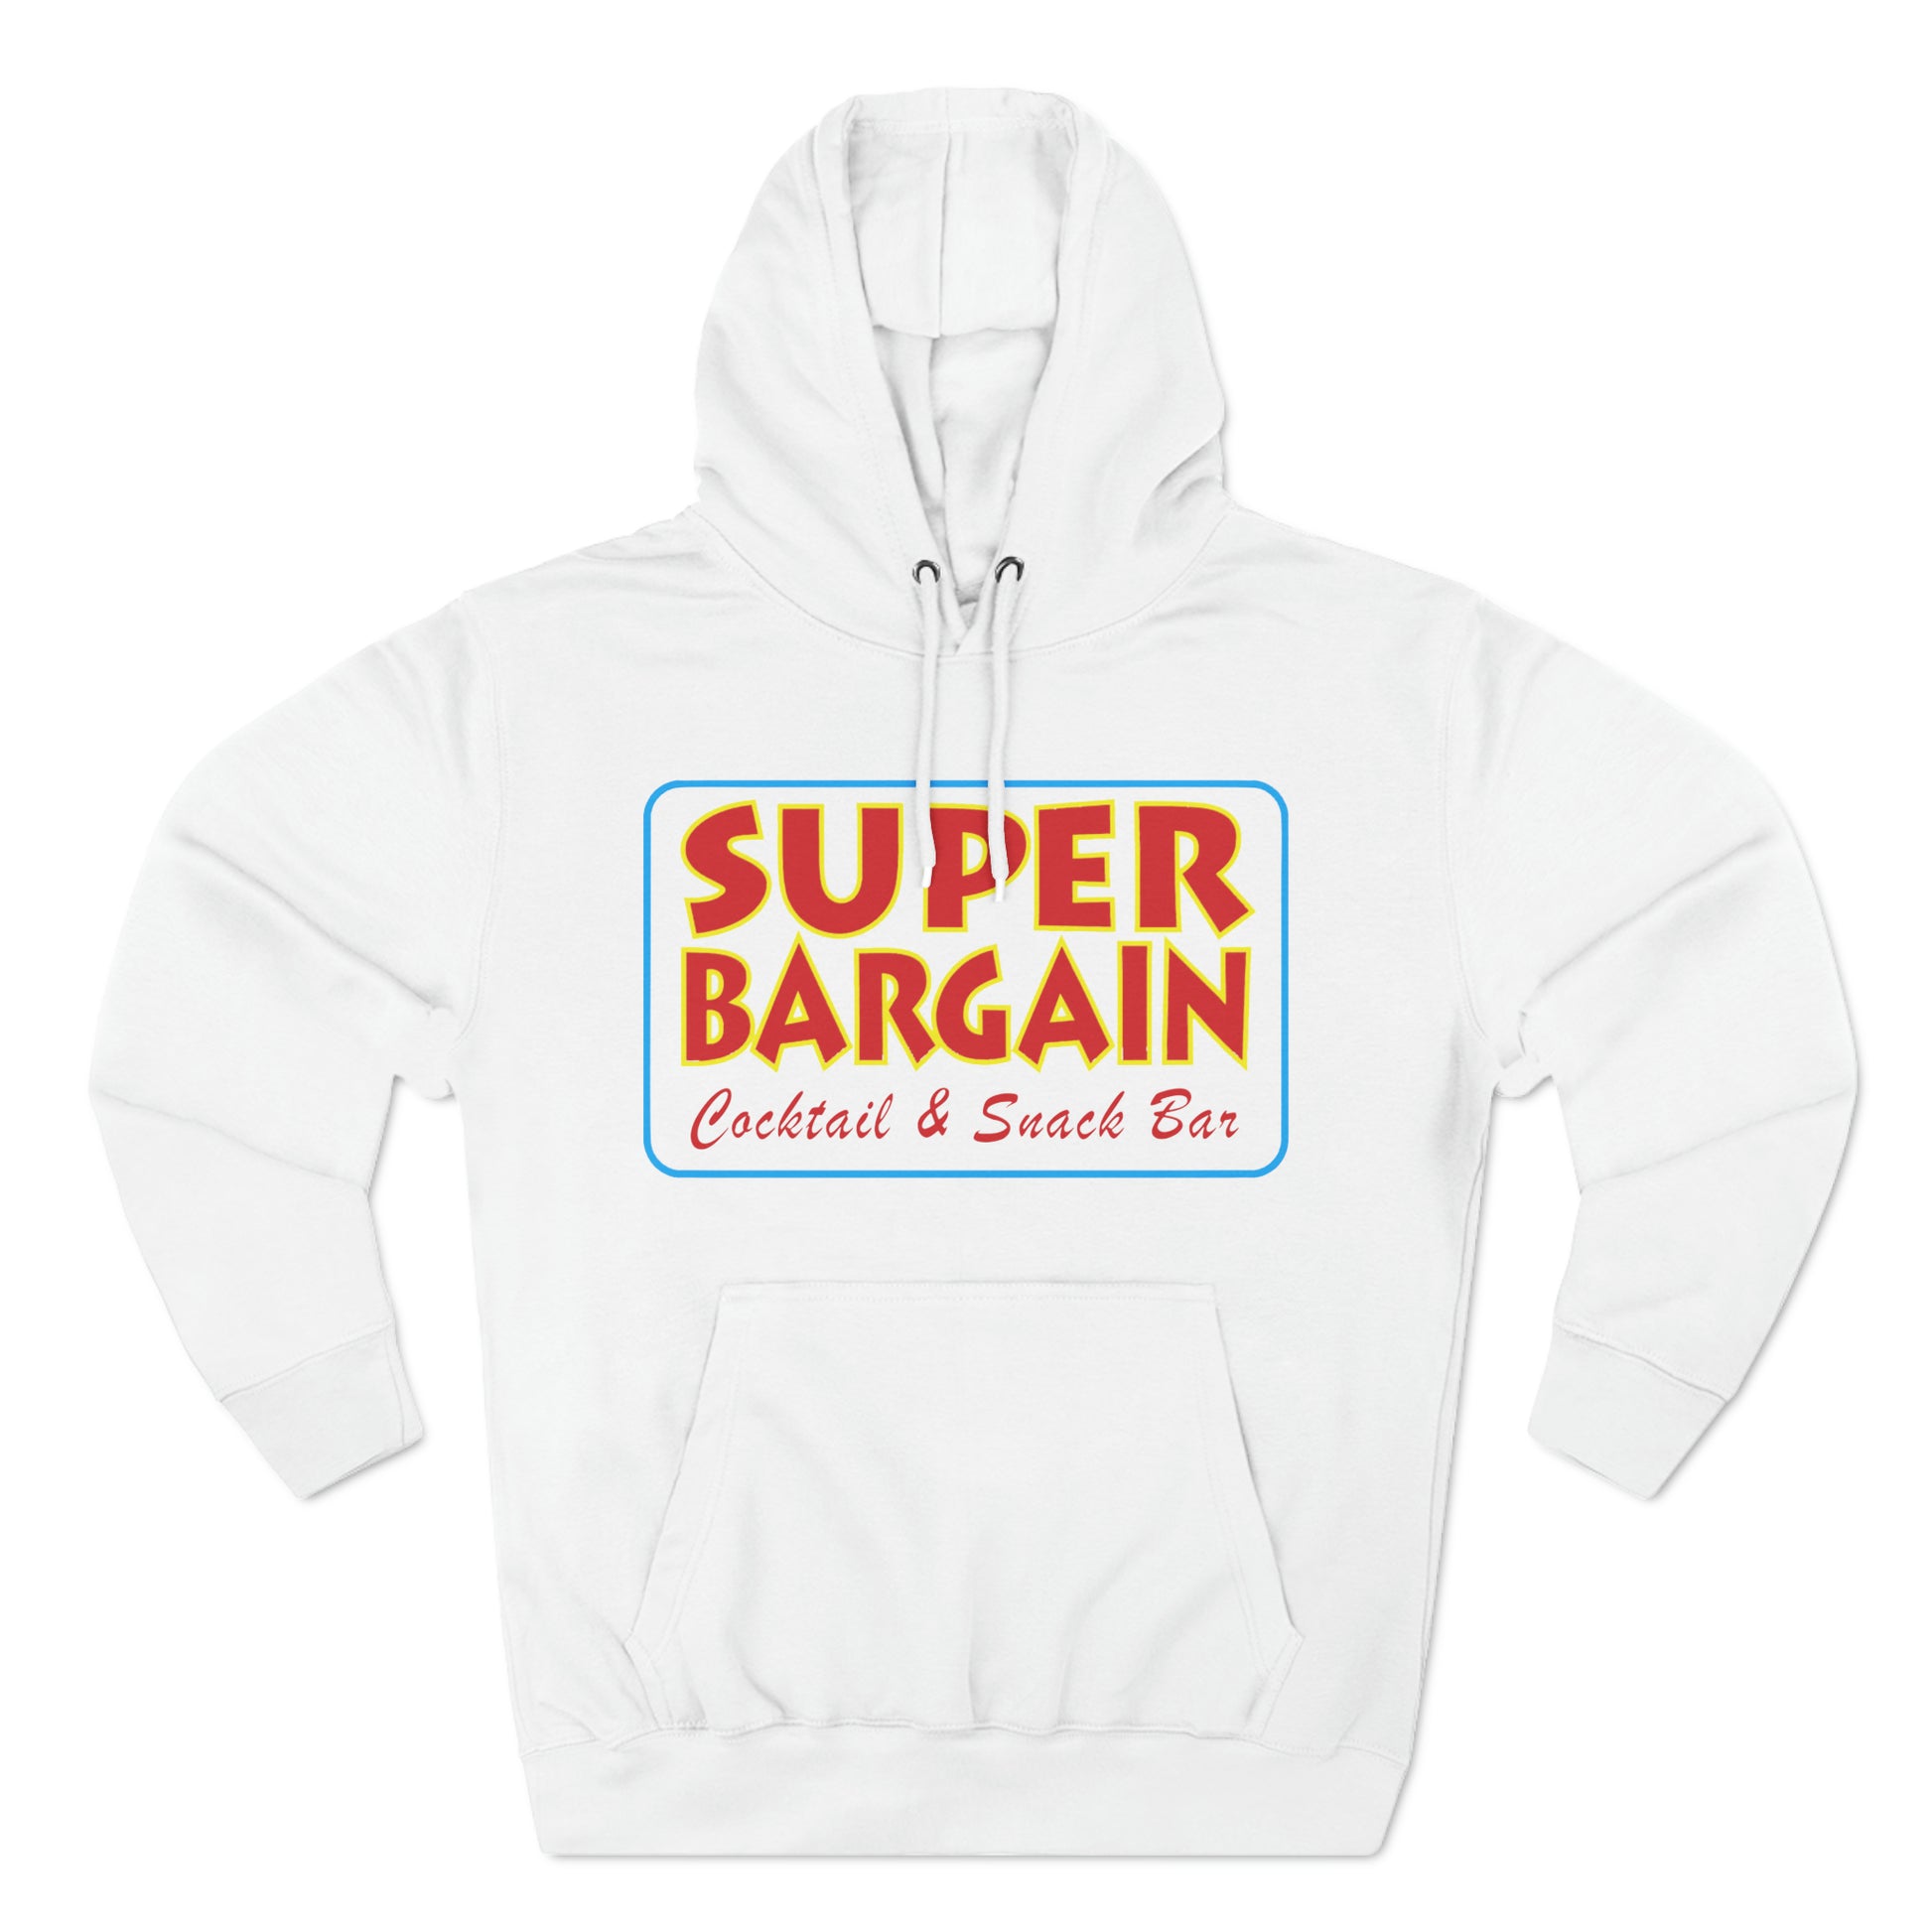 White Unisex Premium Pullover Hoodie with "Cabbagetown SUPER BARGAIN Cocktail & Snack Bar, Toronto" printed in colorful block letters on the front. The hoodie has a front pouch and drawstrings.